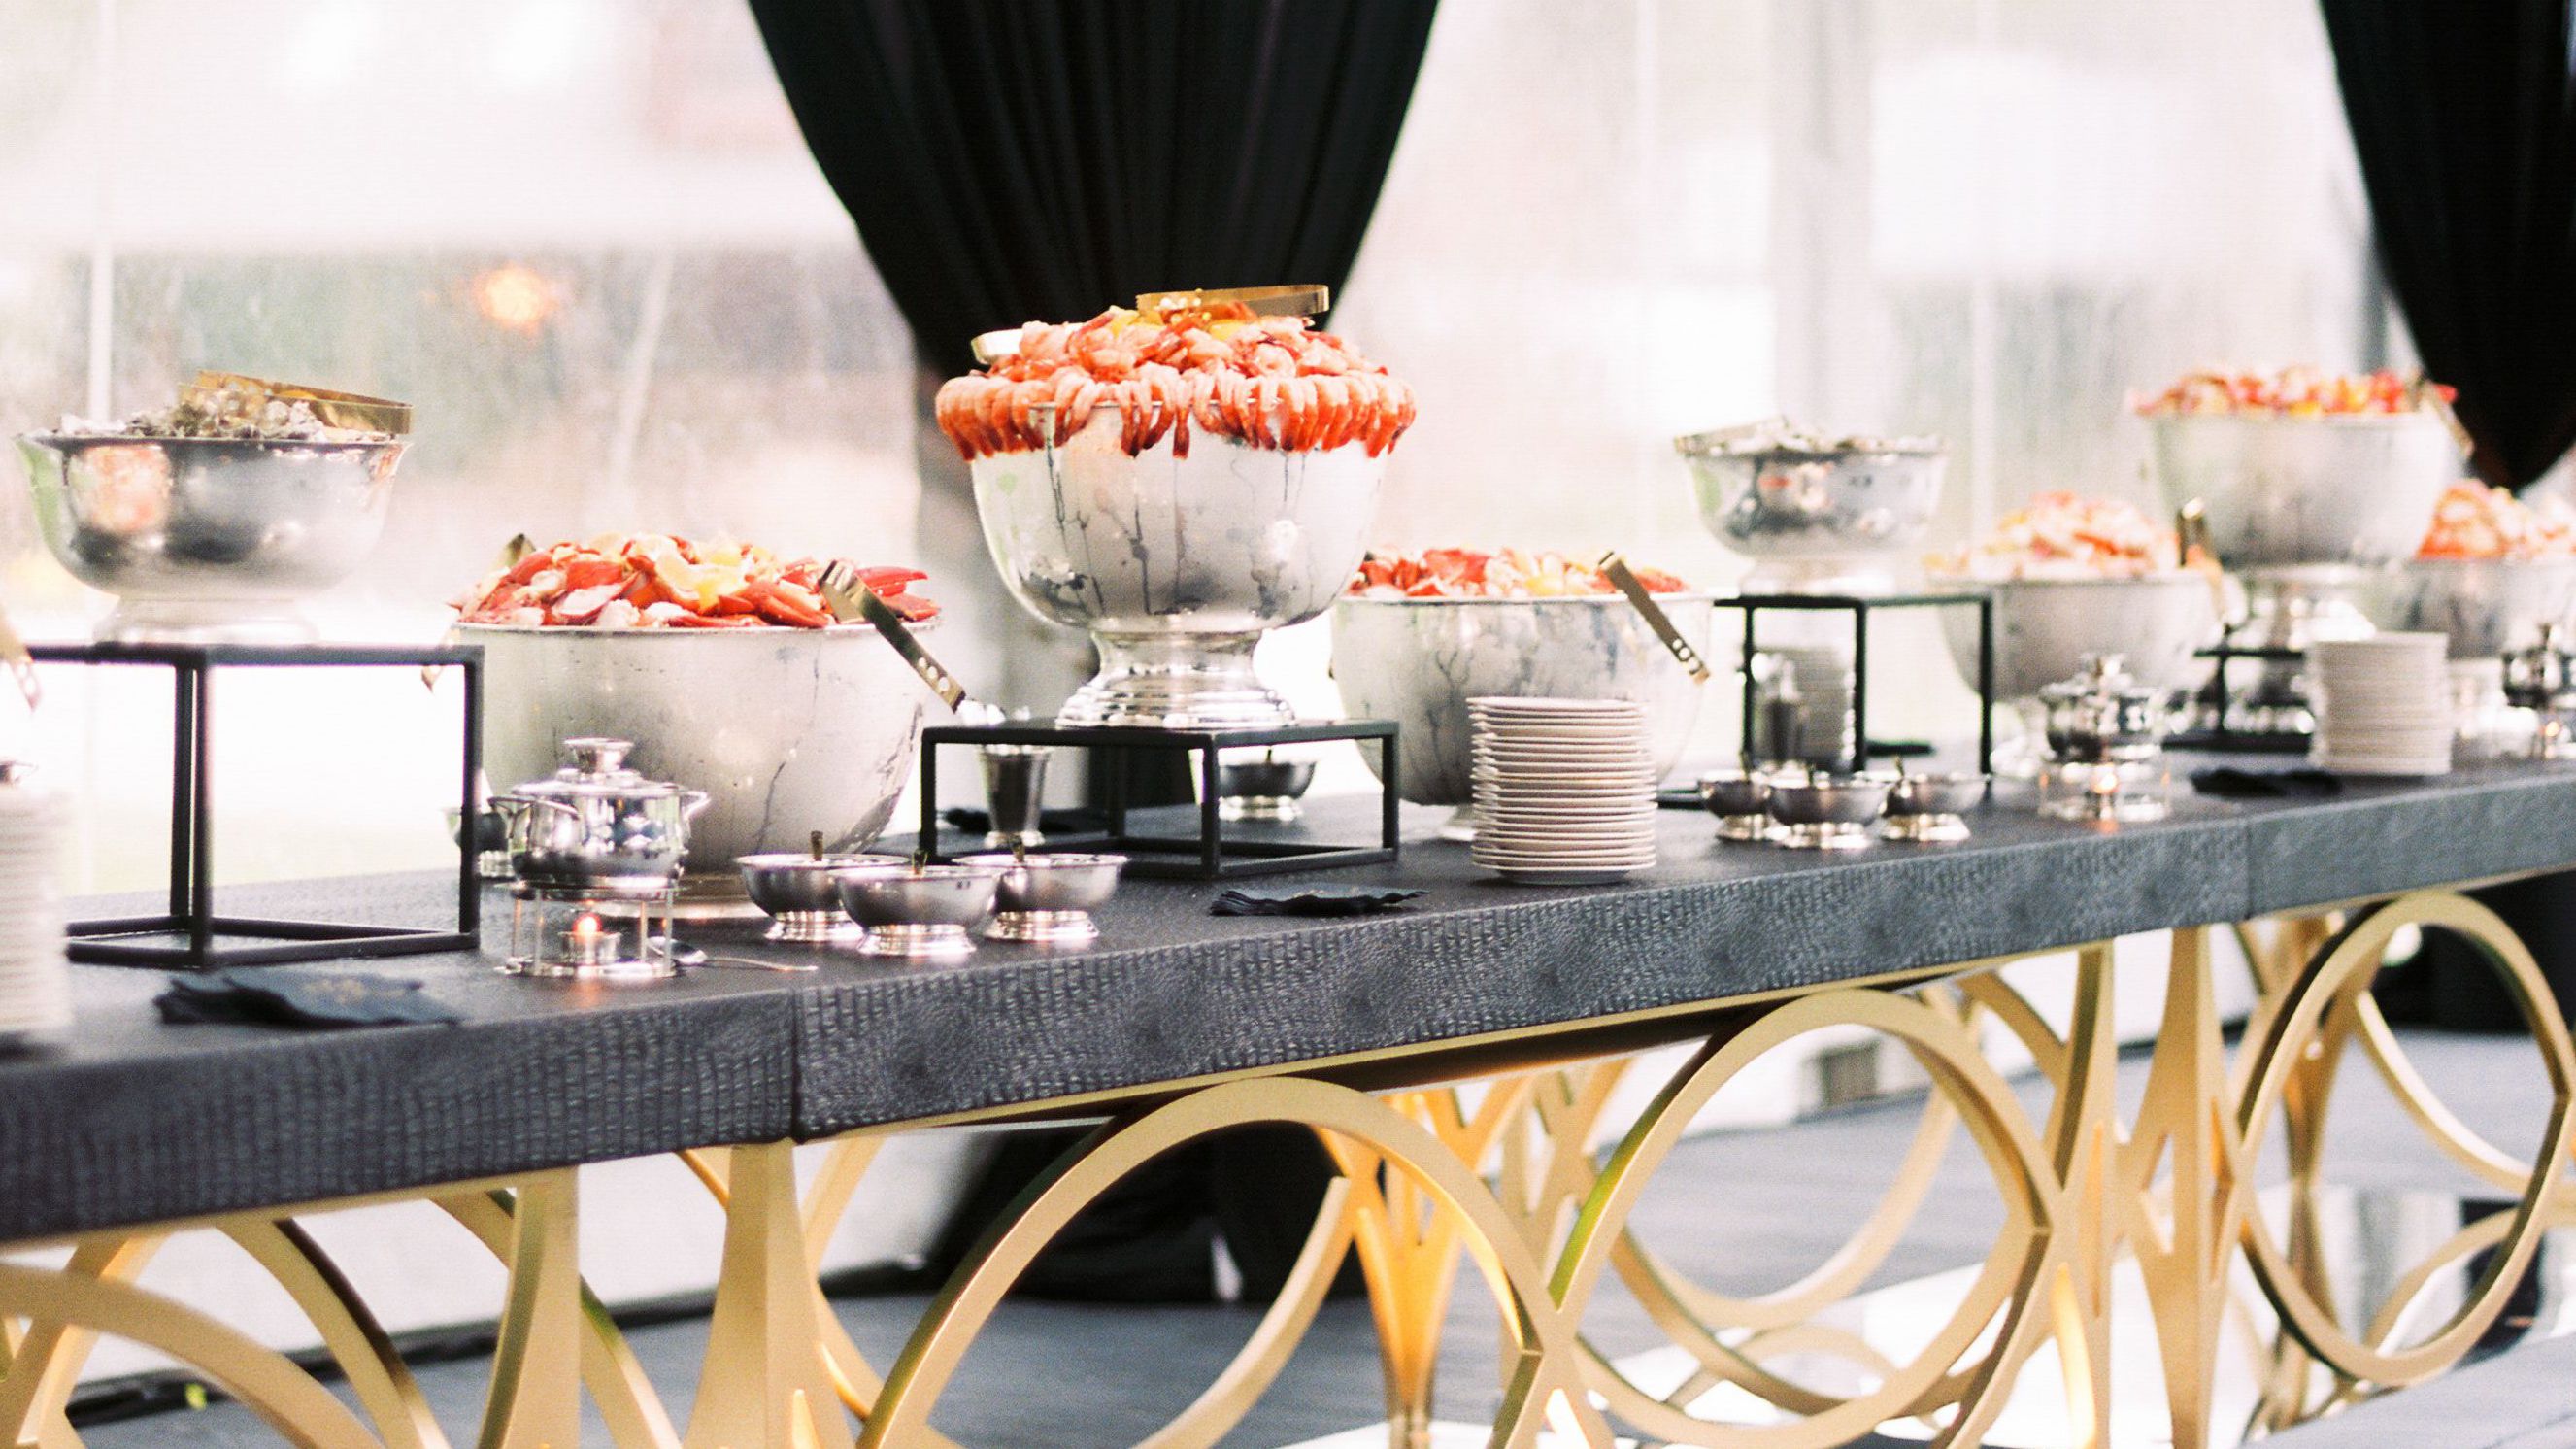 Some Smart and out of League Options for your Wedding Buffet